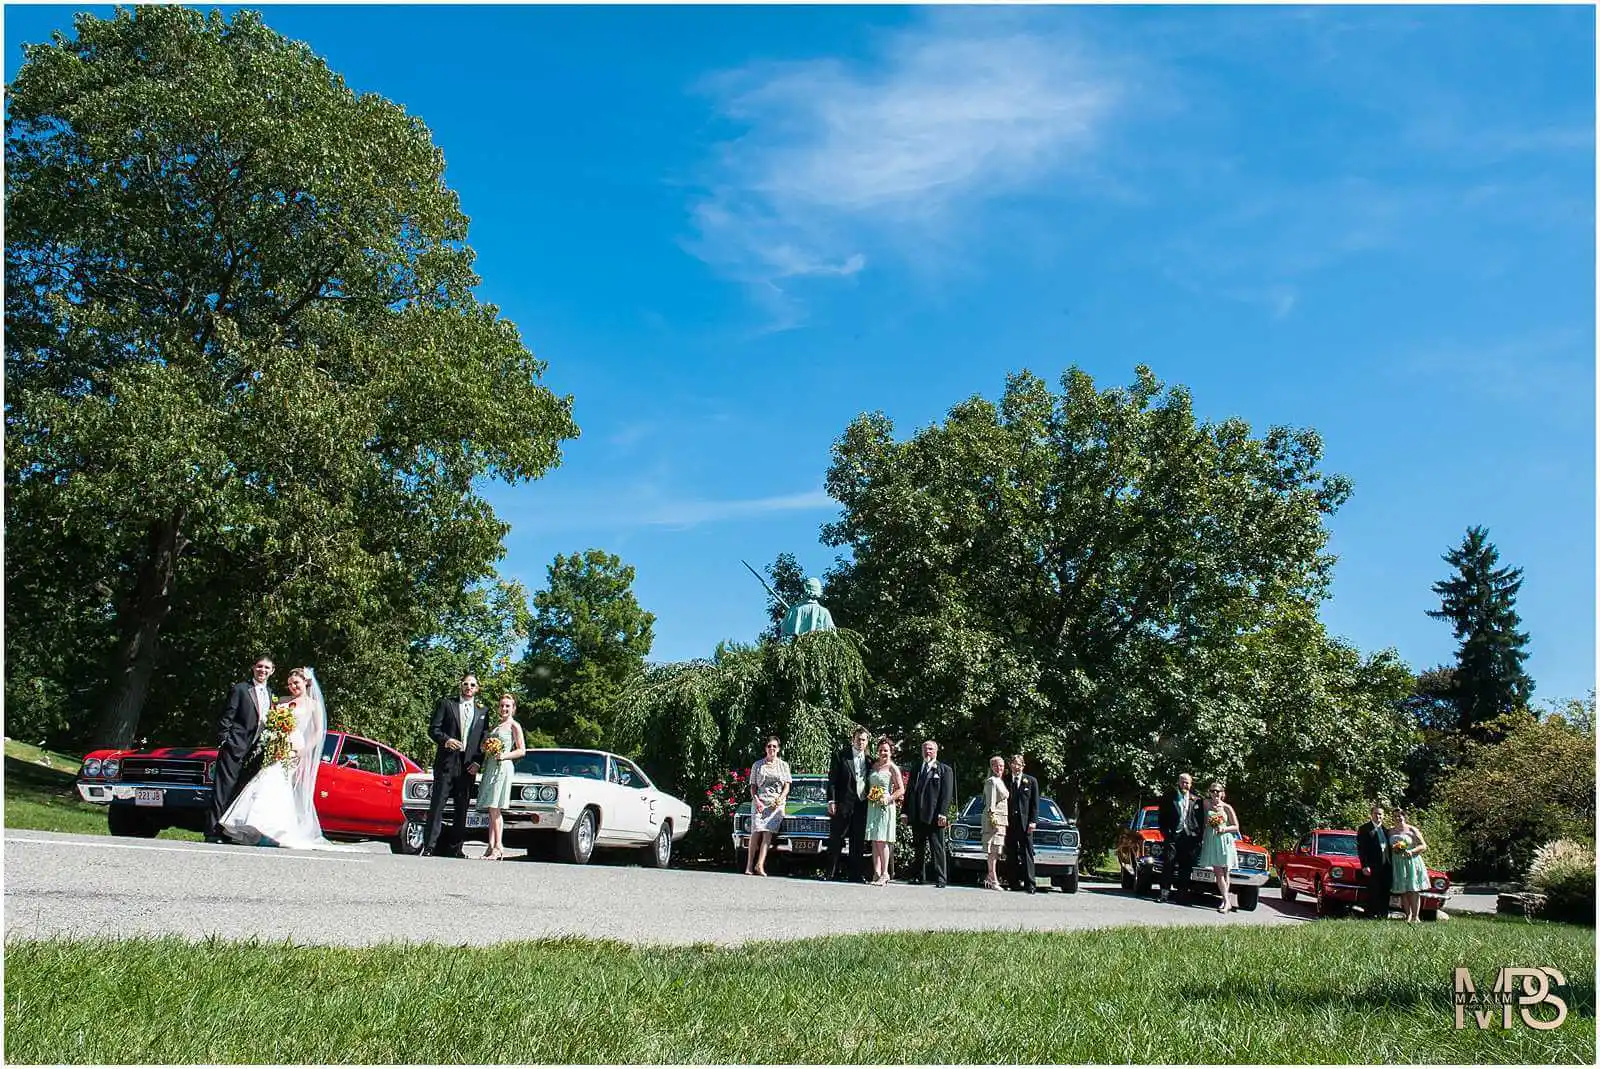 Outdoor wedding celebration with bridal party and vintage cars.